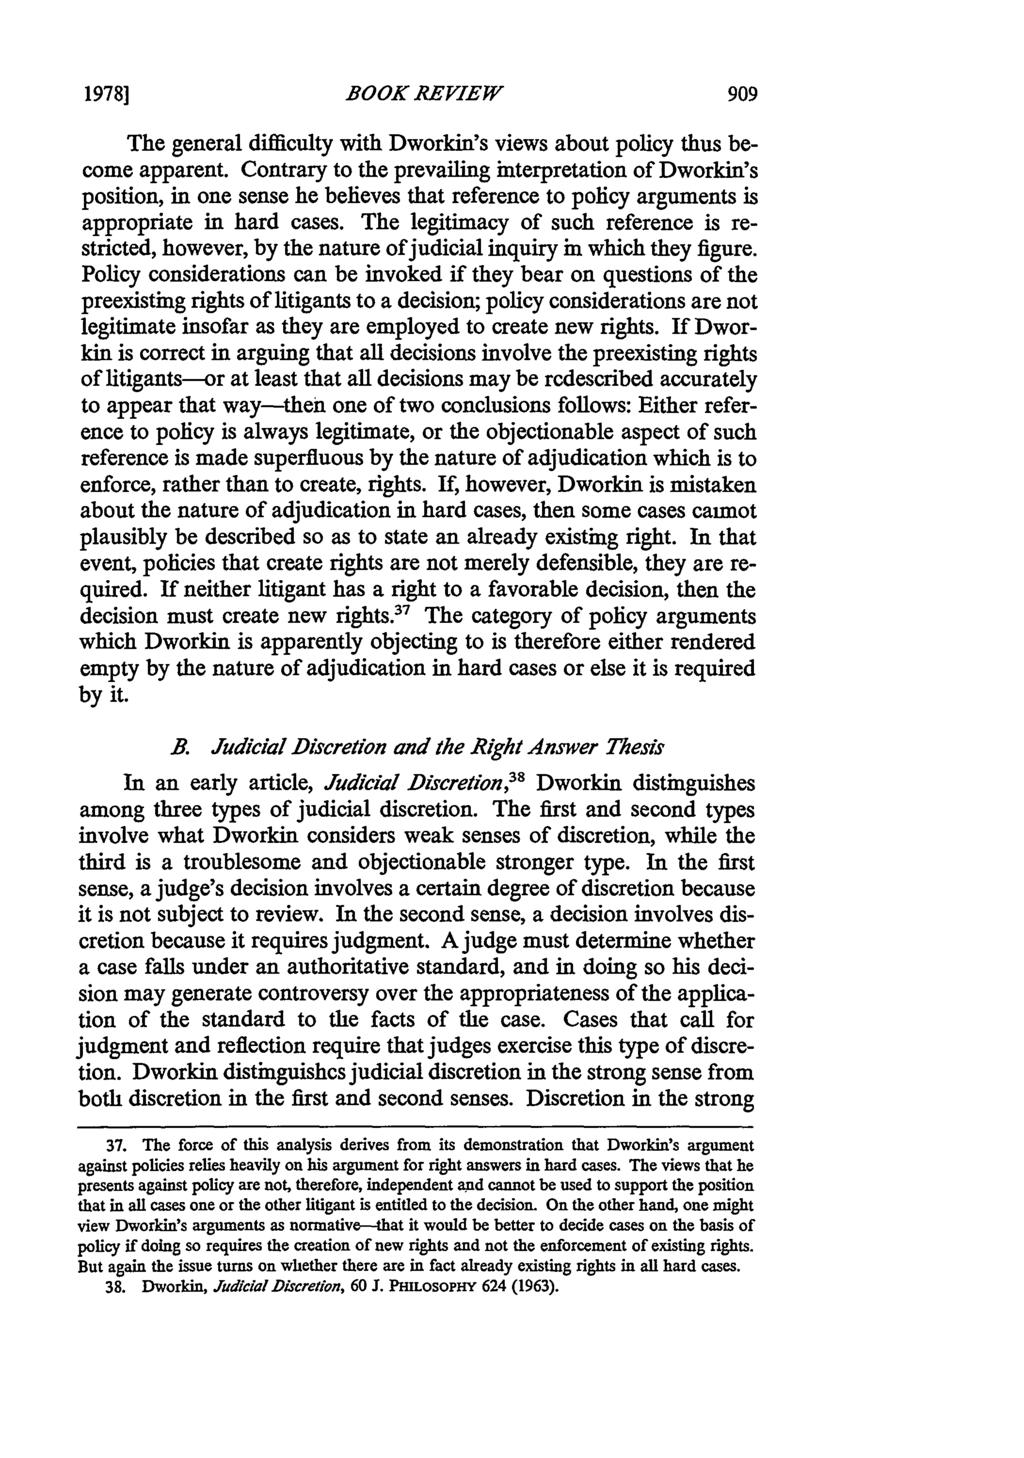 1978] BOOK REVIEW The general difficulty with Dworkin's views about policy thus become apparent.